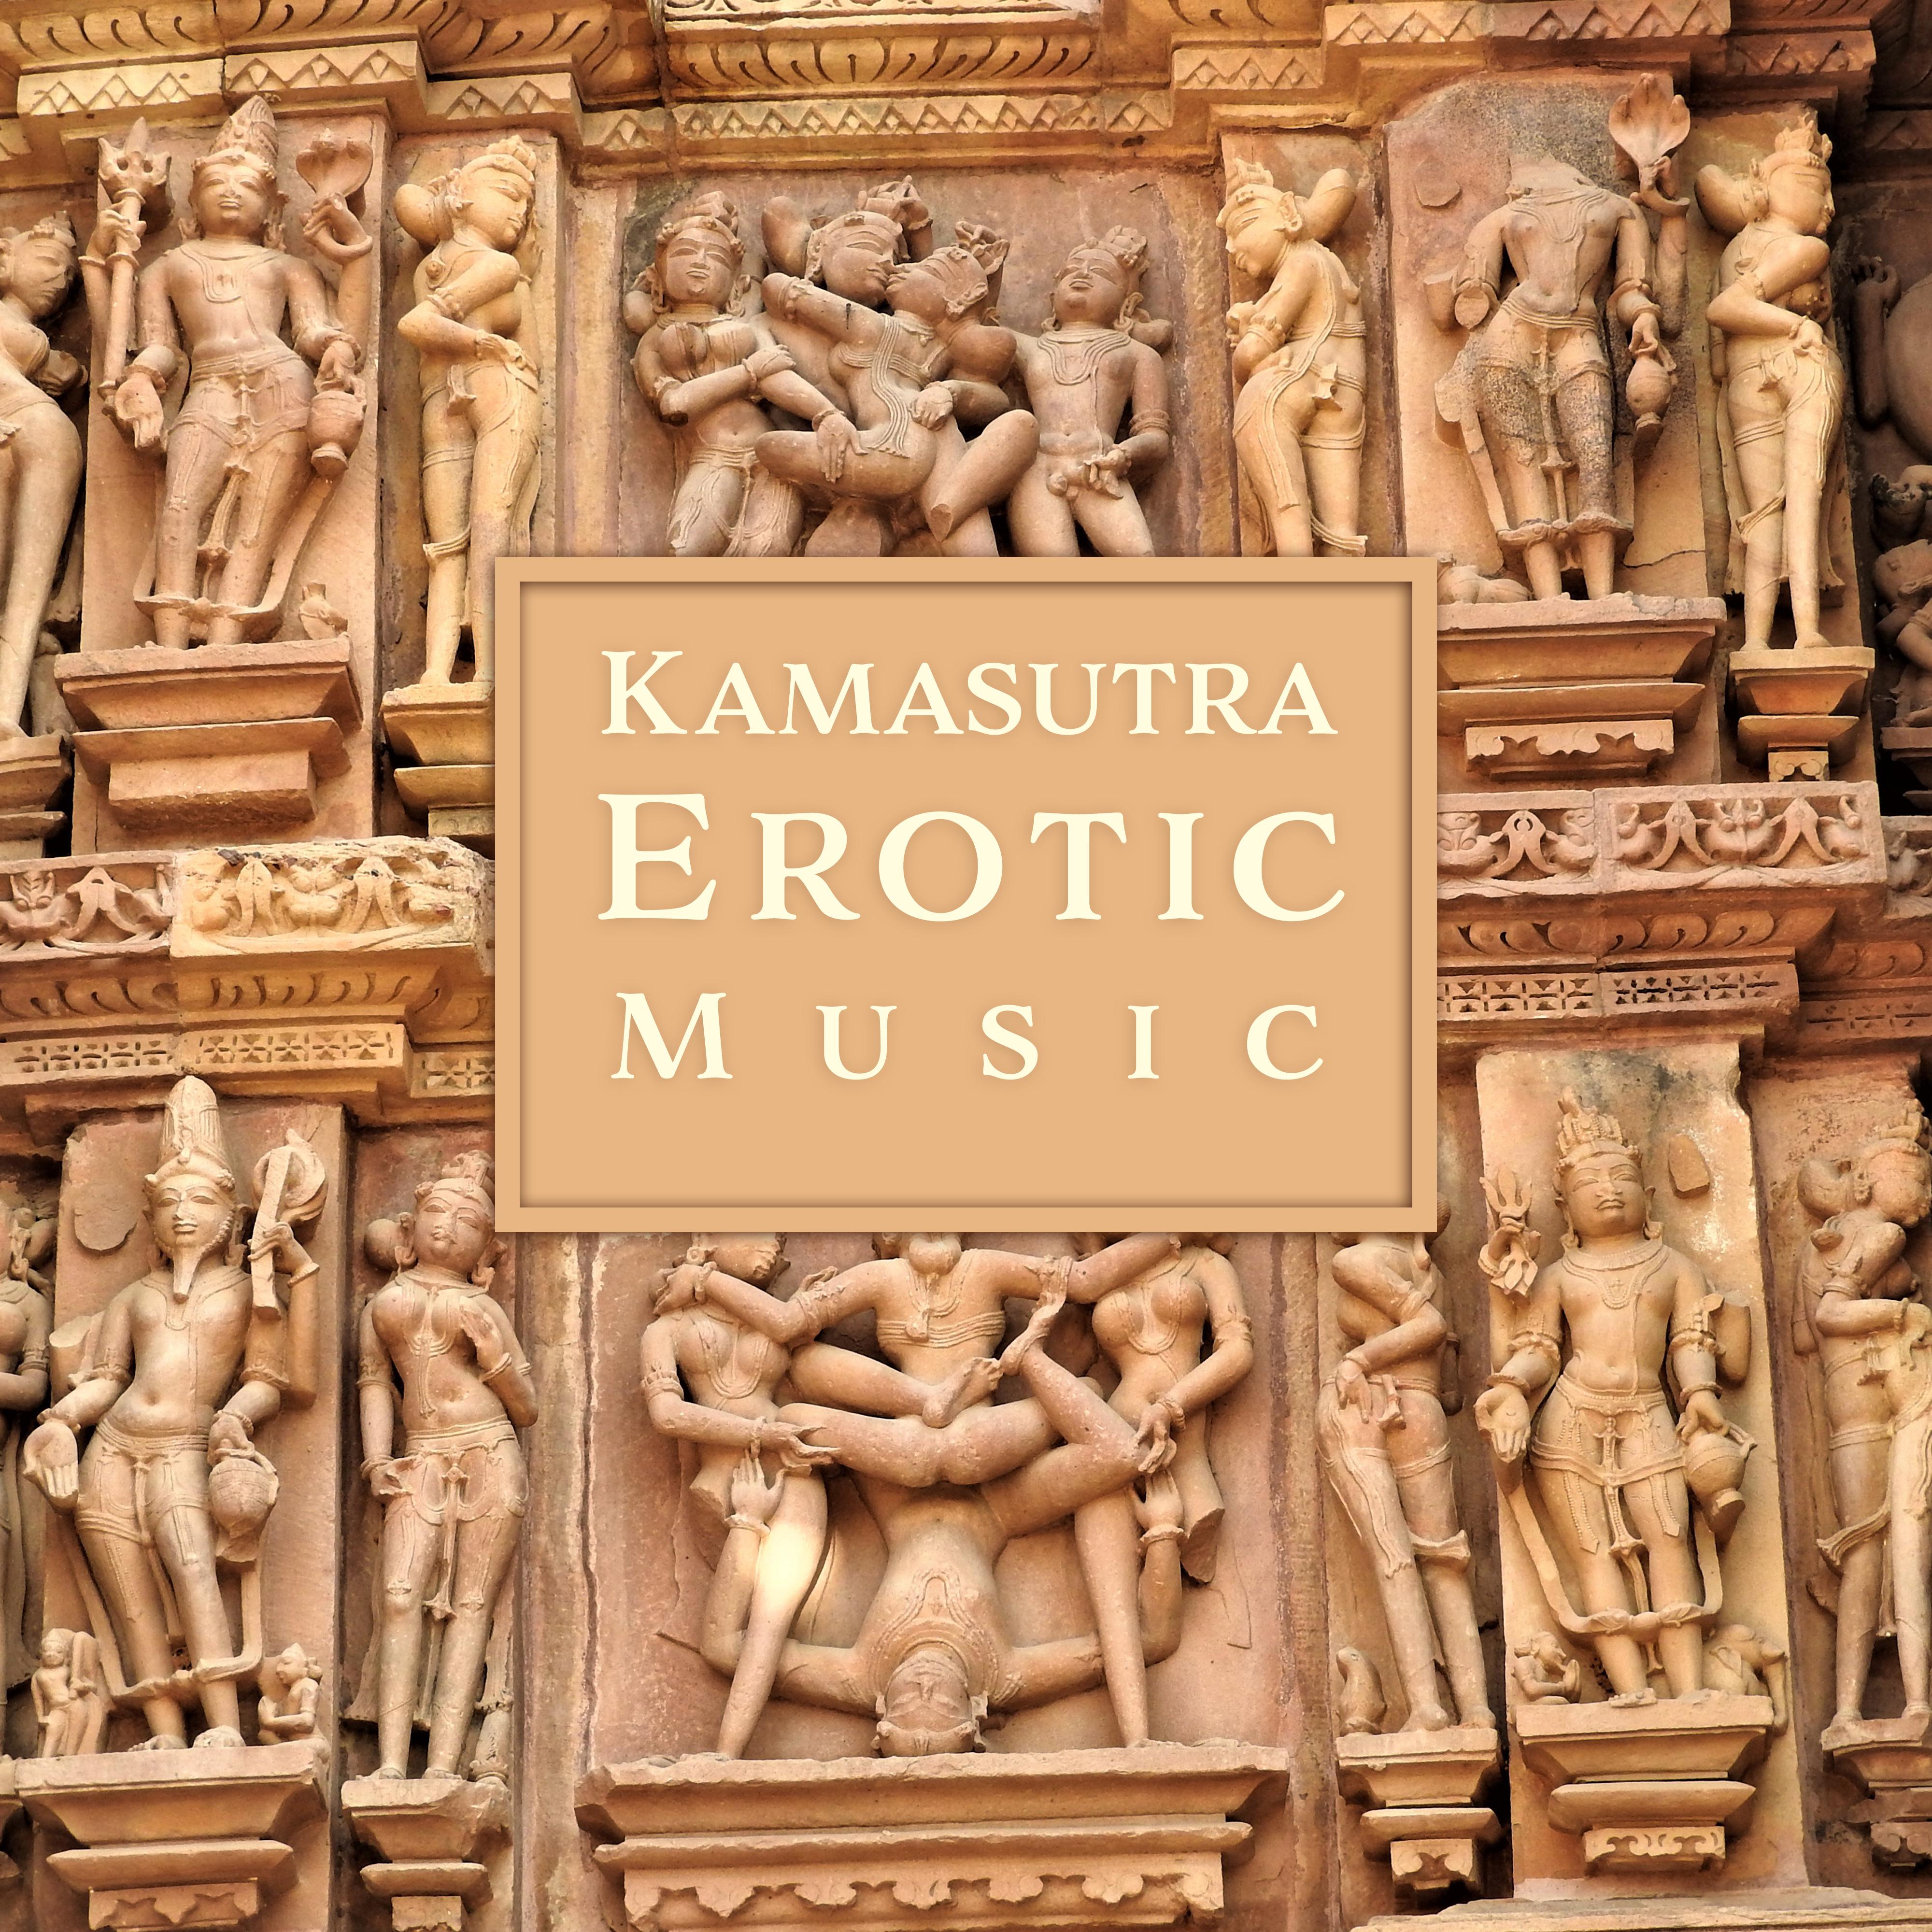 Kamasutra Erotic Music – Sensual Vibes for Making Love, **** Chill Out, Tantric ***, Erotic Beats, Chill Out 2019